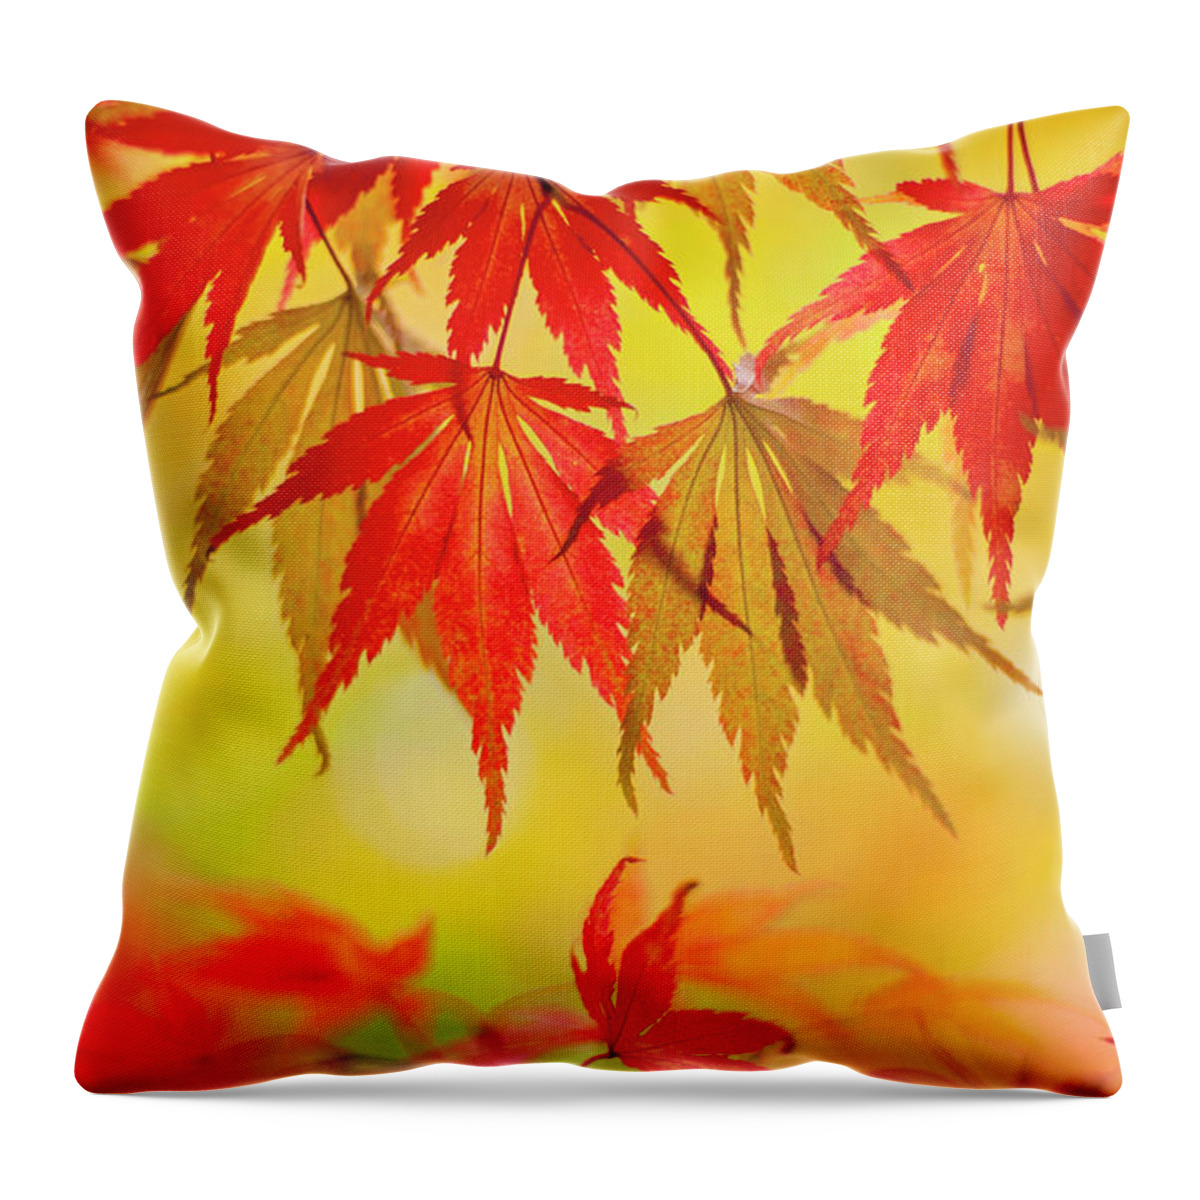 Outdoors Throw Pillow featuring the photograph Japanese Maple Leaves by Jacky Parker Photography